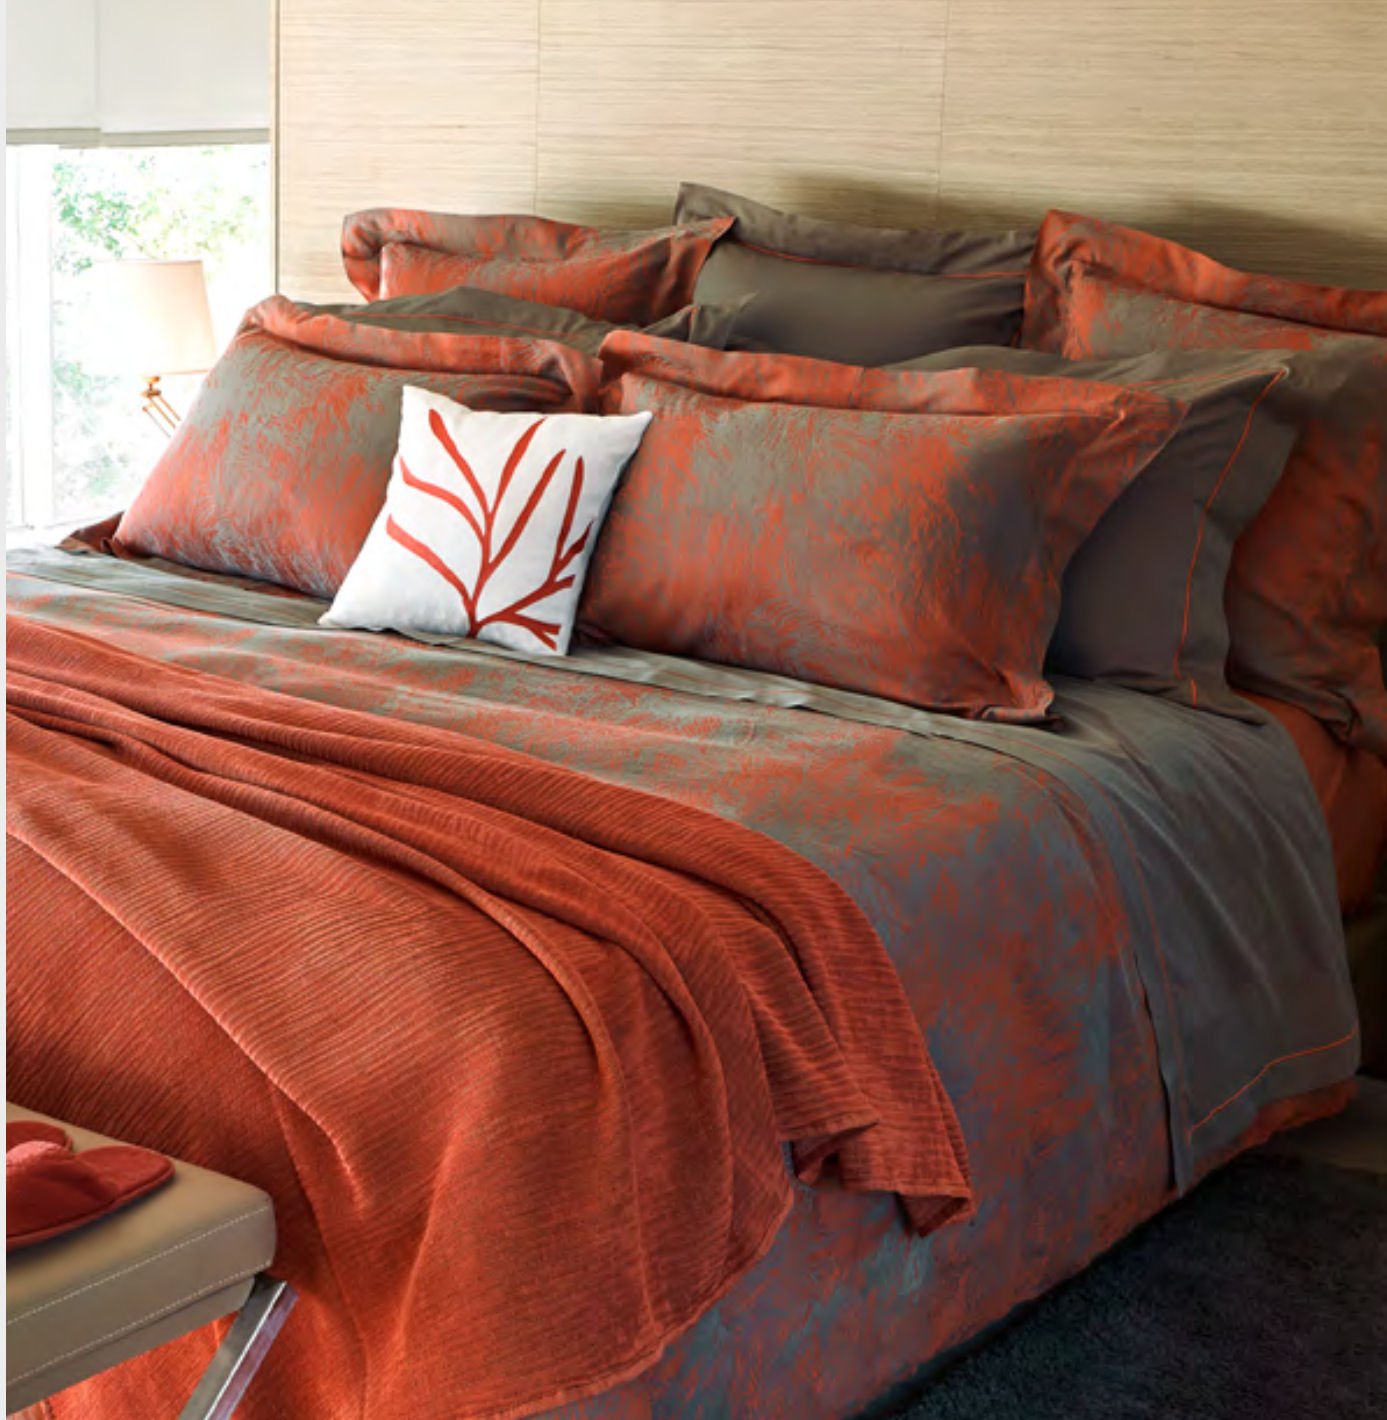 PLUME Luxury Egyptian Cotton Bed Linen in Orange or Blue color - |VESIMI Design| Luxury and Rustic bathrooms online